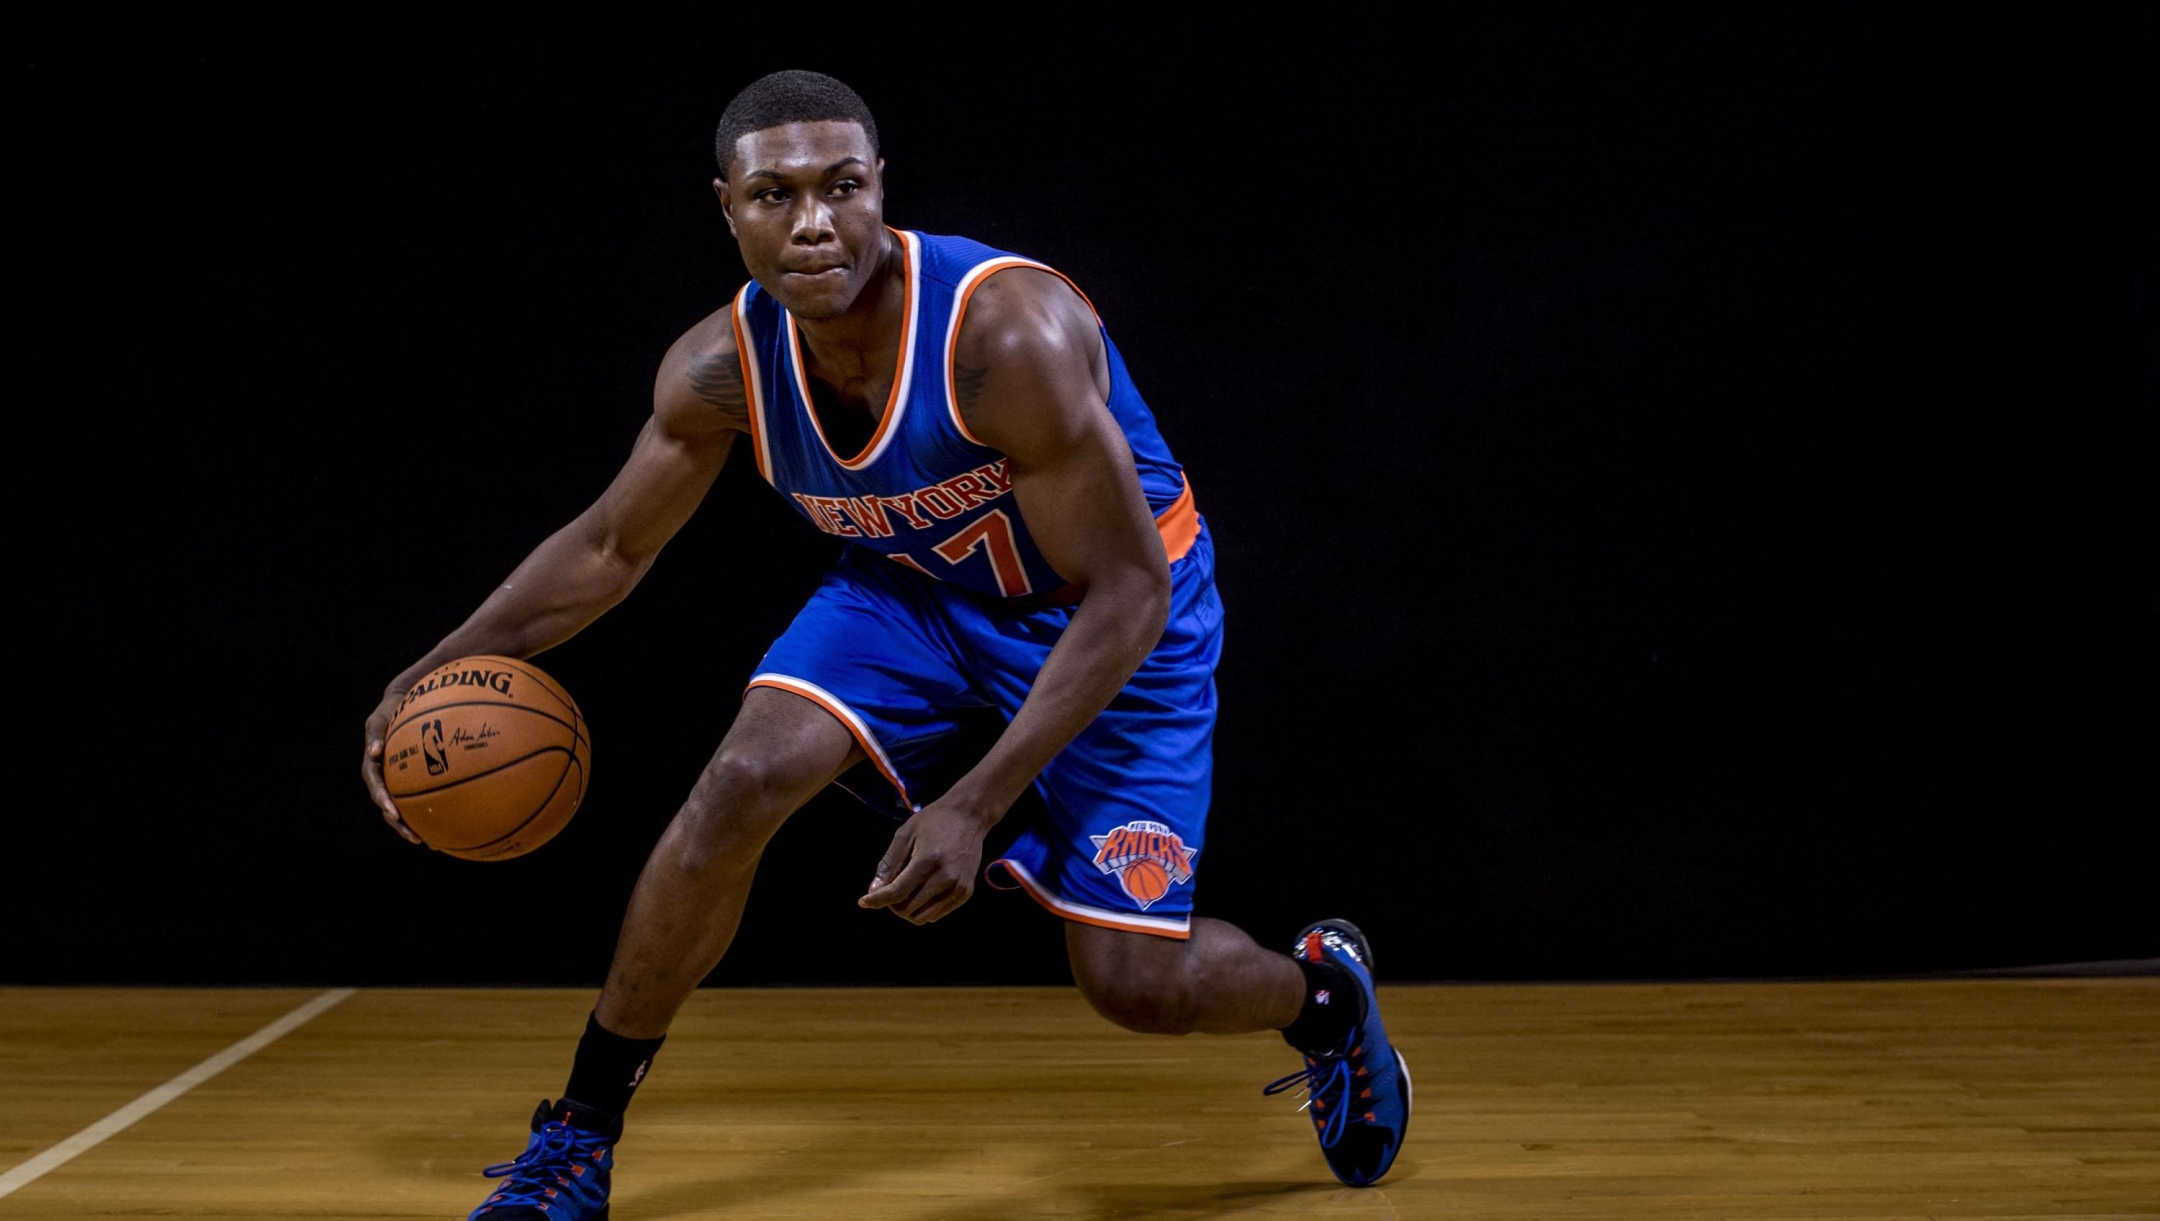 TARRYTOWN, NY - AUGUST 03: Cleanthony Early #17 of the New York Knicks poses for a portrait during the 2014 NBA rookie photo shoot at MSG Training Center on August 3, 2014 in Tarrytown, New York. NOTE TO USER: User expressly acknowledges and agrees that, by downloading and or using this photograph, User is consenting to the terms and conditions of the Getty Images License Agreement.   Nick Laham/Getty Images/AFP (Photo by NICK LAHAM / GETTY IMAGES NORTH AMERICA / Getty Images via AFP)